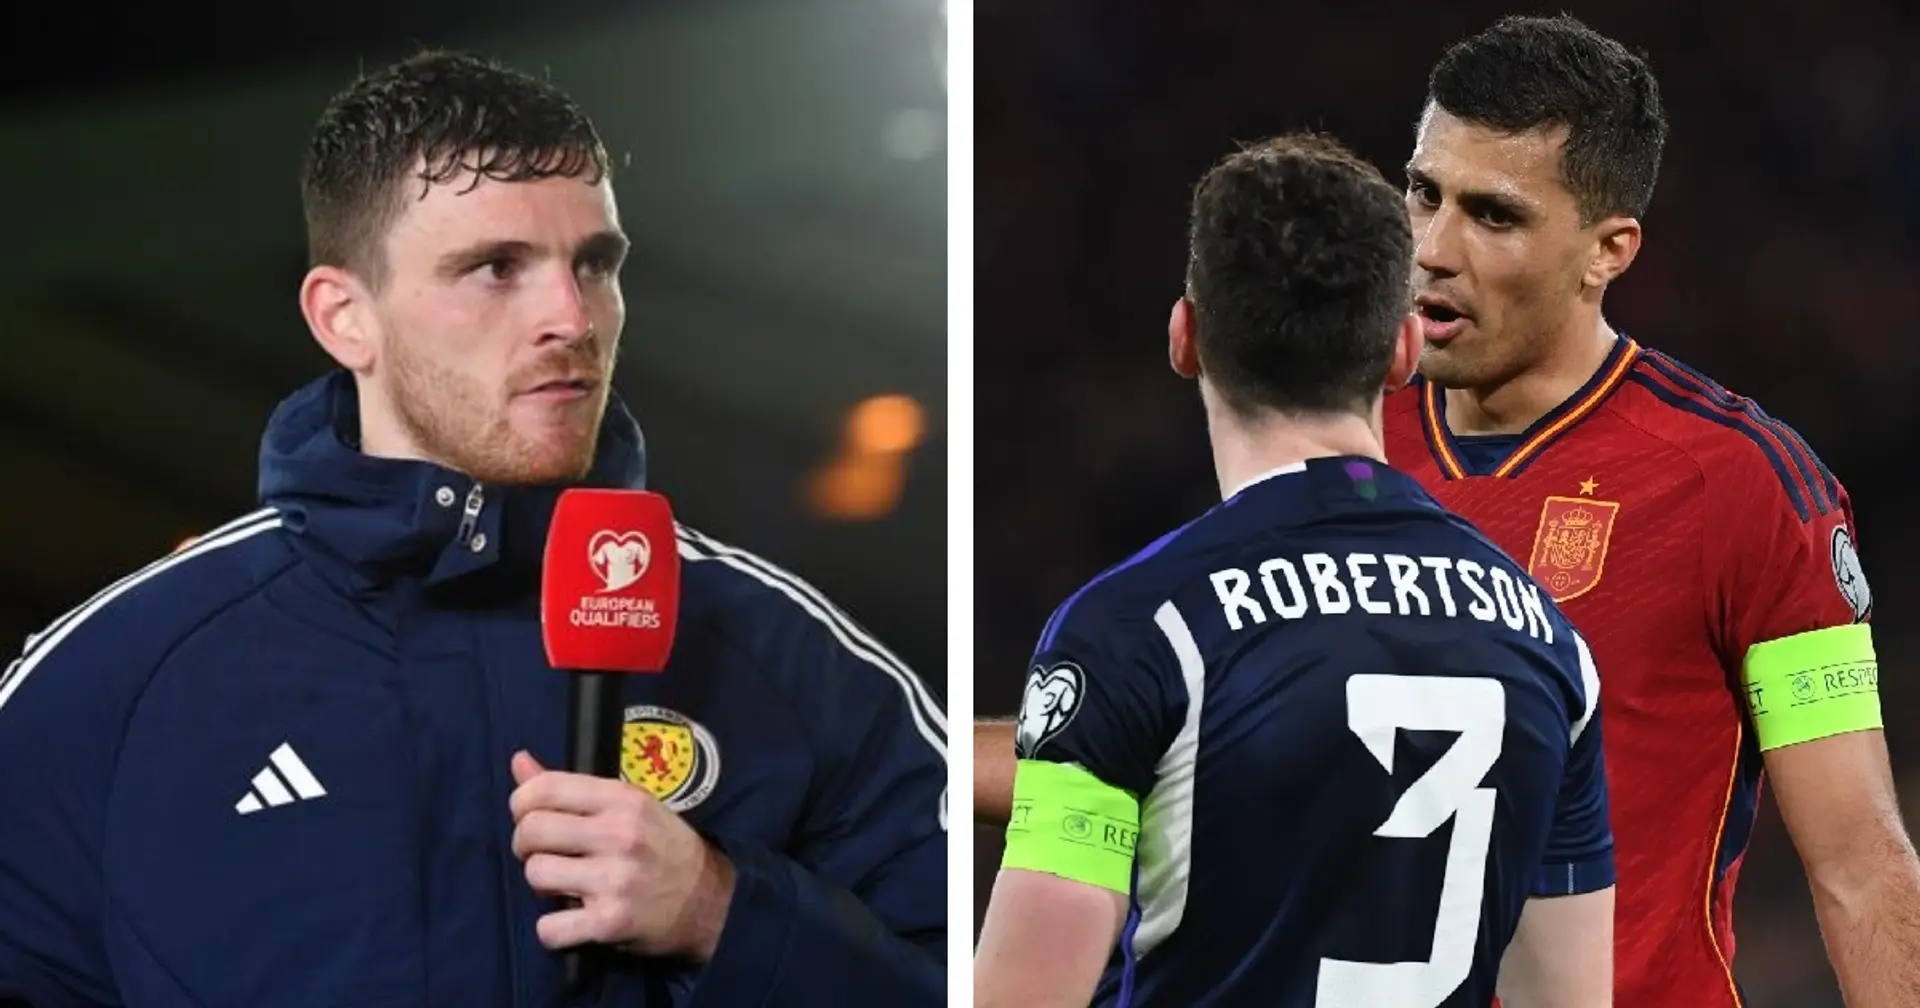 'They were rolling around a wee bit much': Robertson responds as Rodri accuses Scotland players of time-wasting